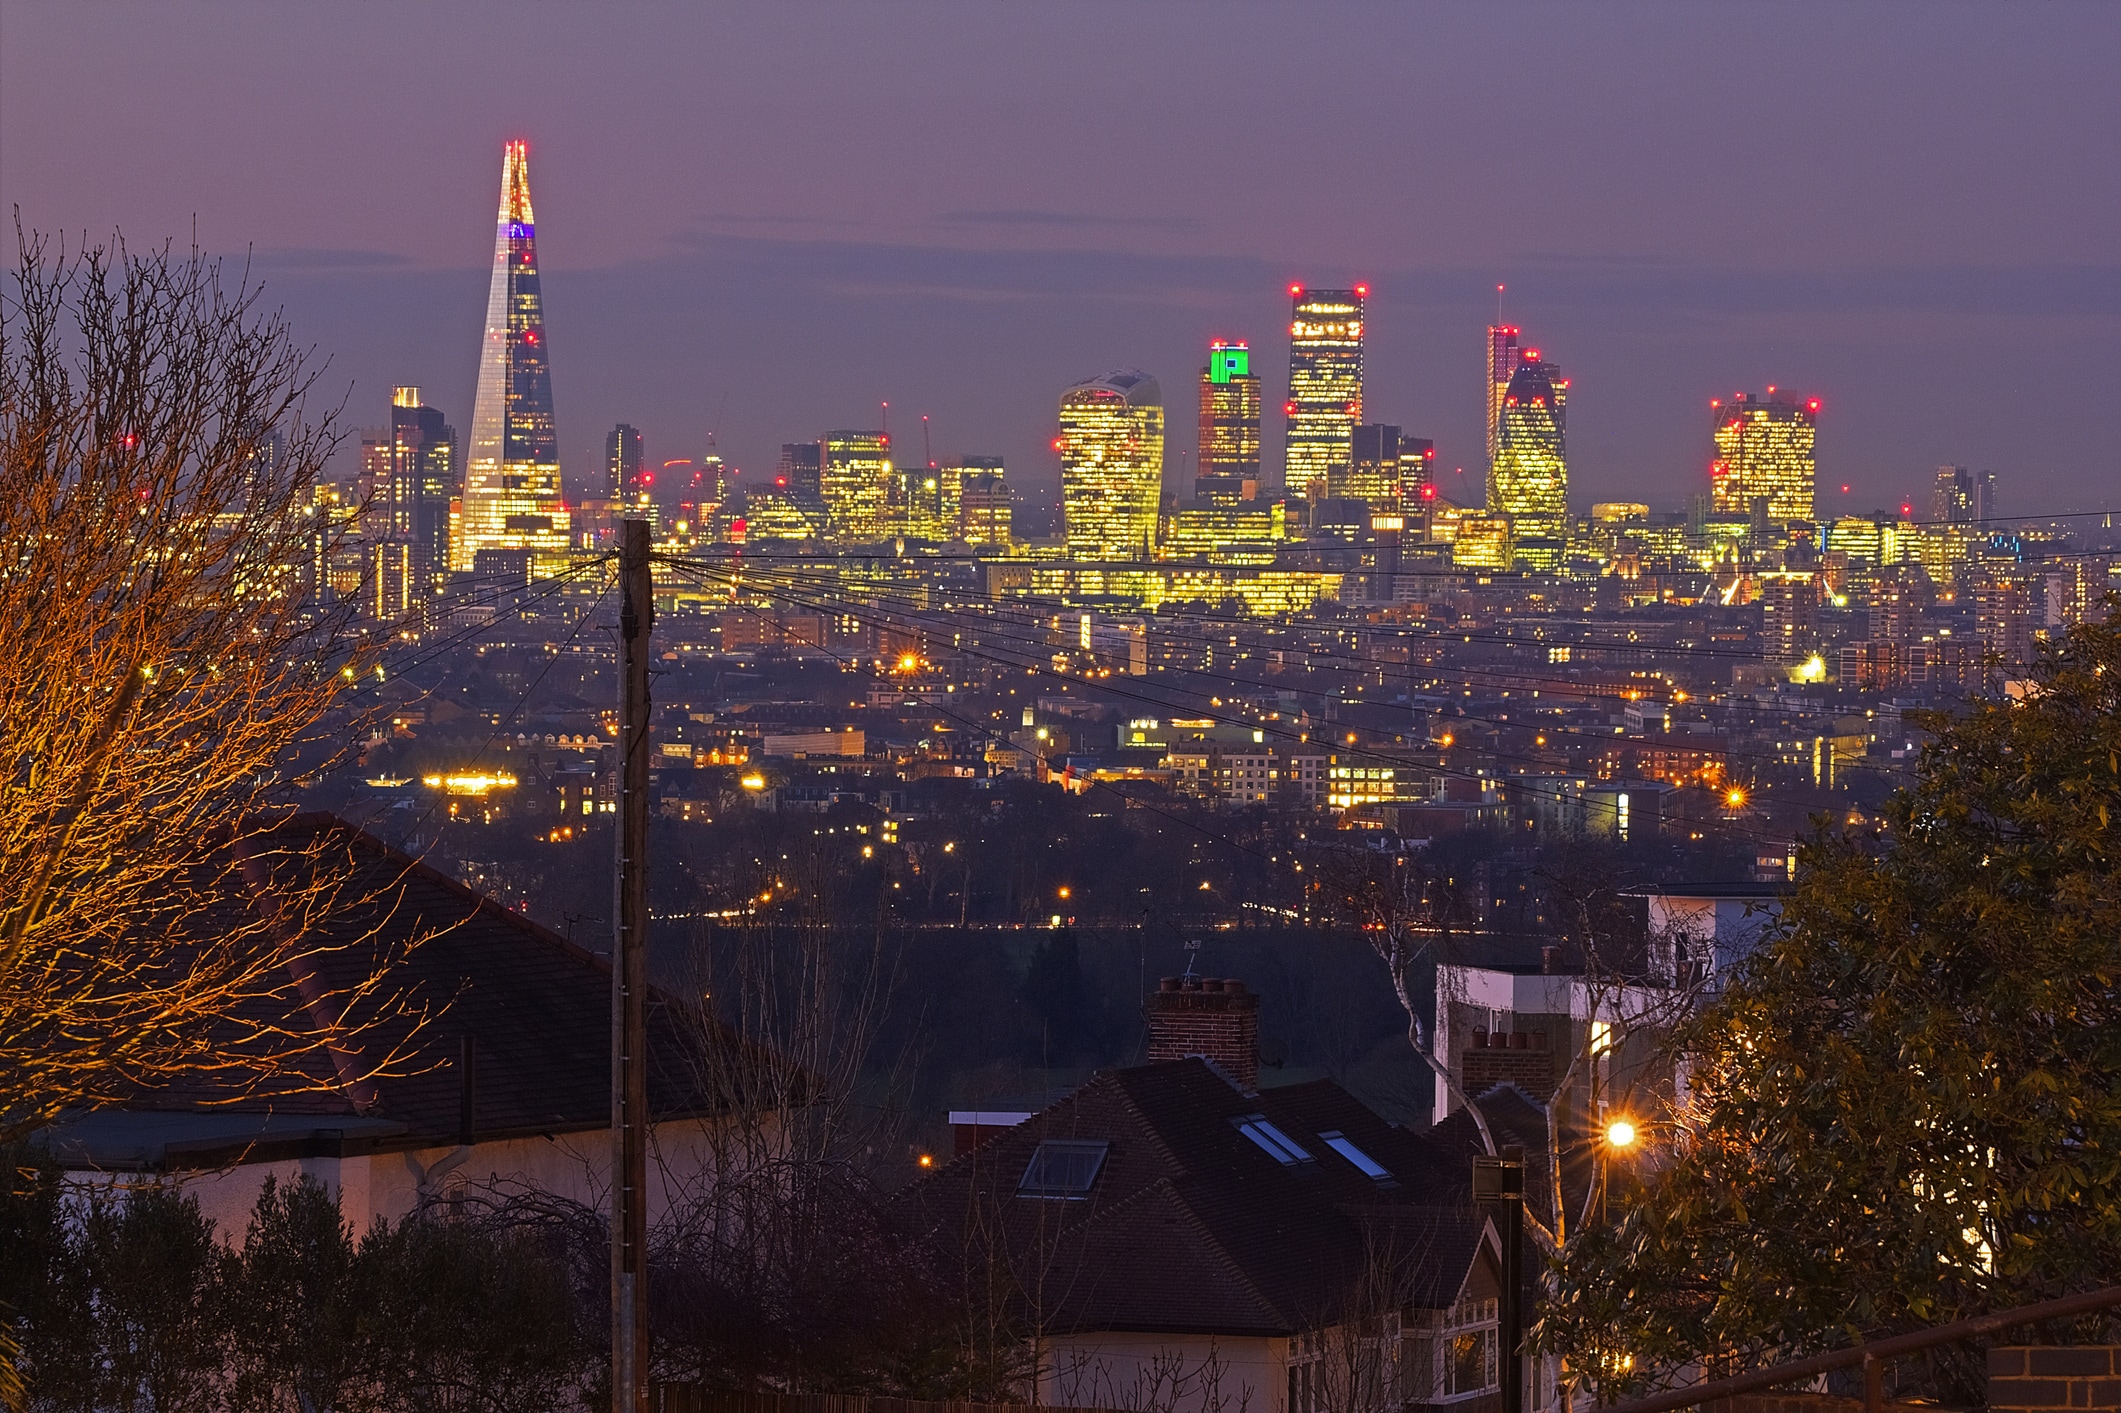 Annual review 2021: FTSE 100 - London skyline at night